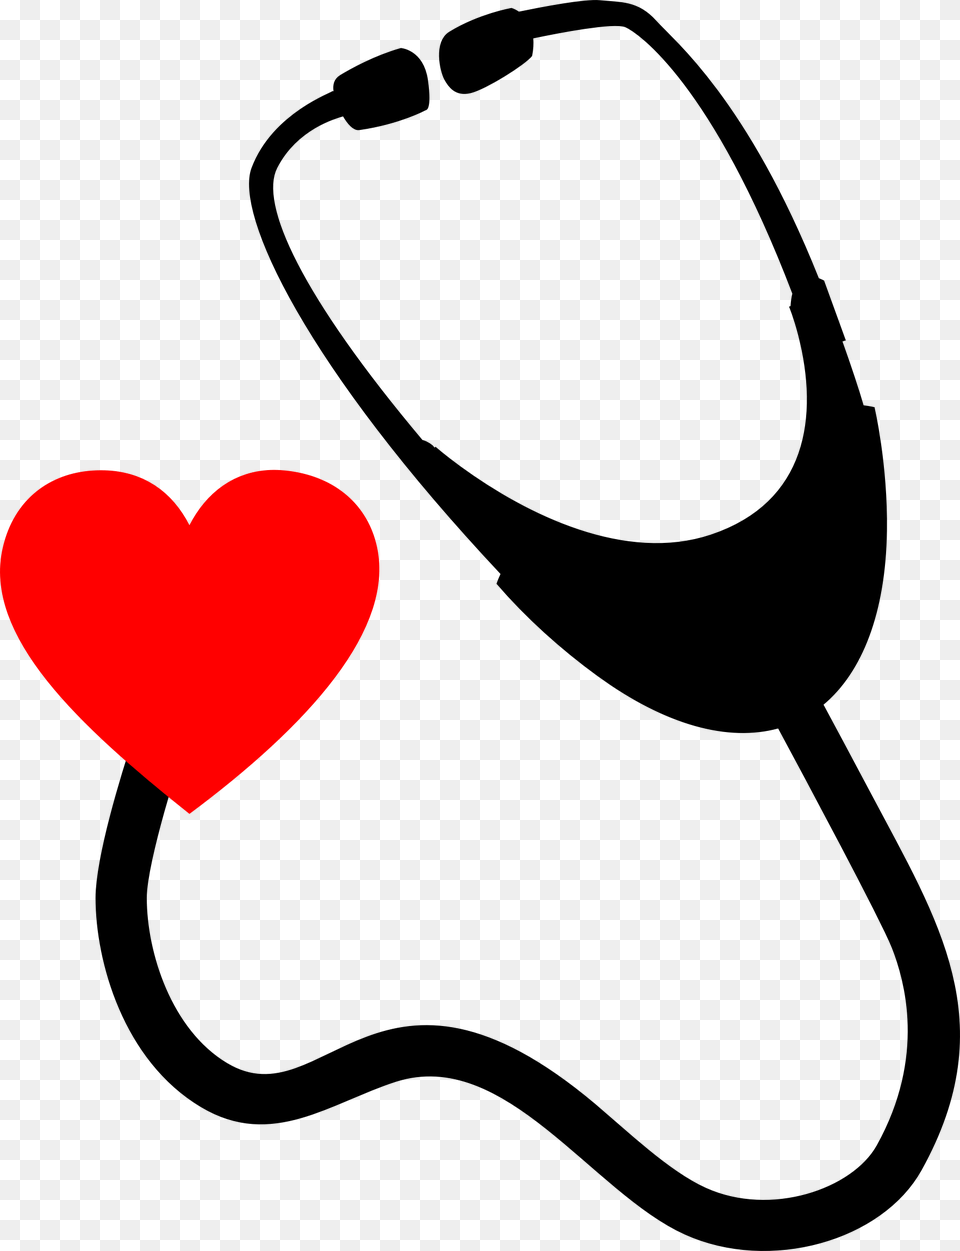 Heart Stethoscope Icons Png